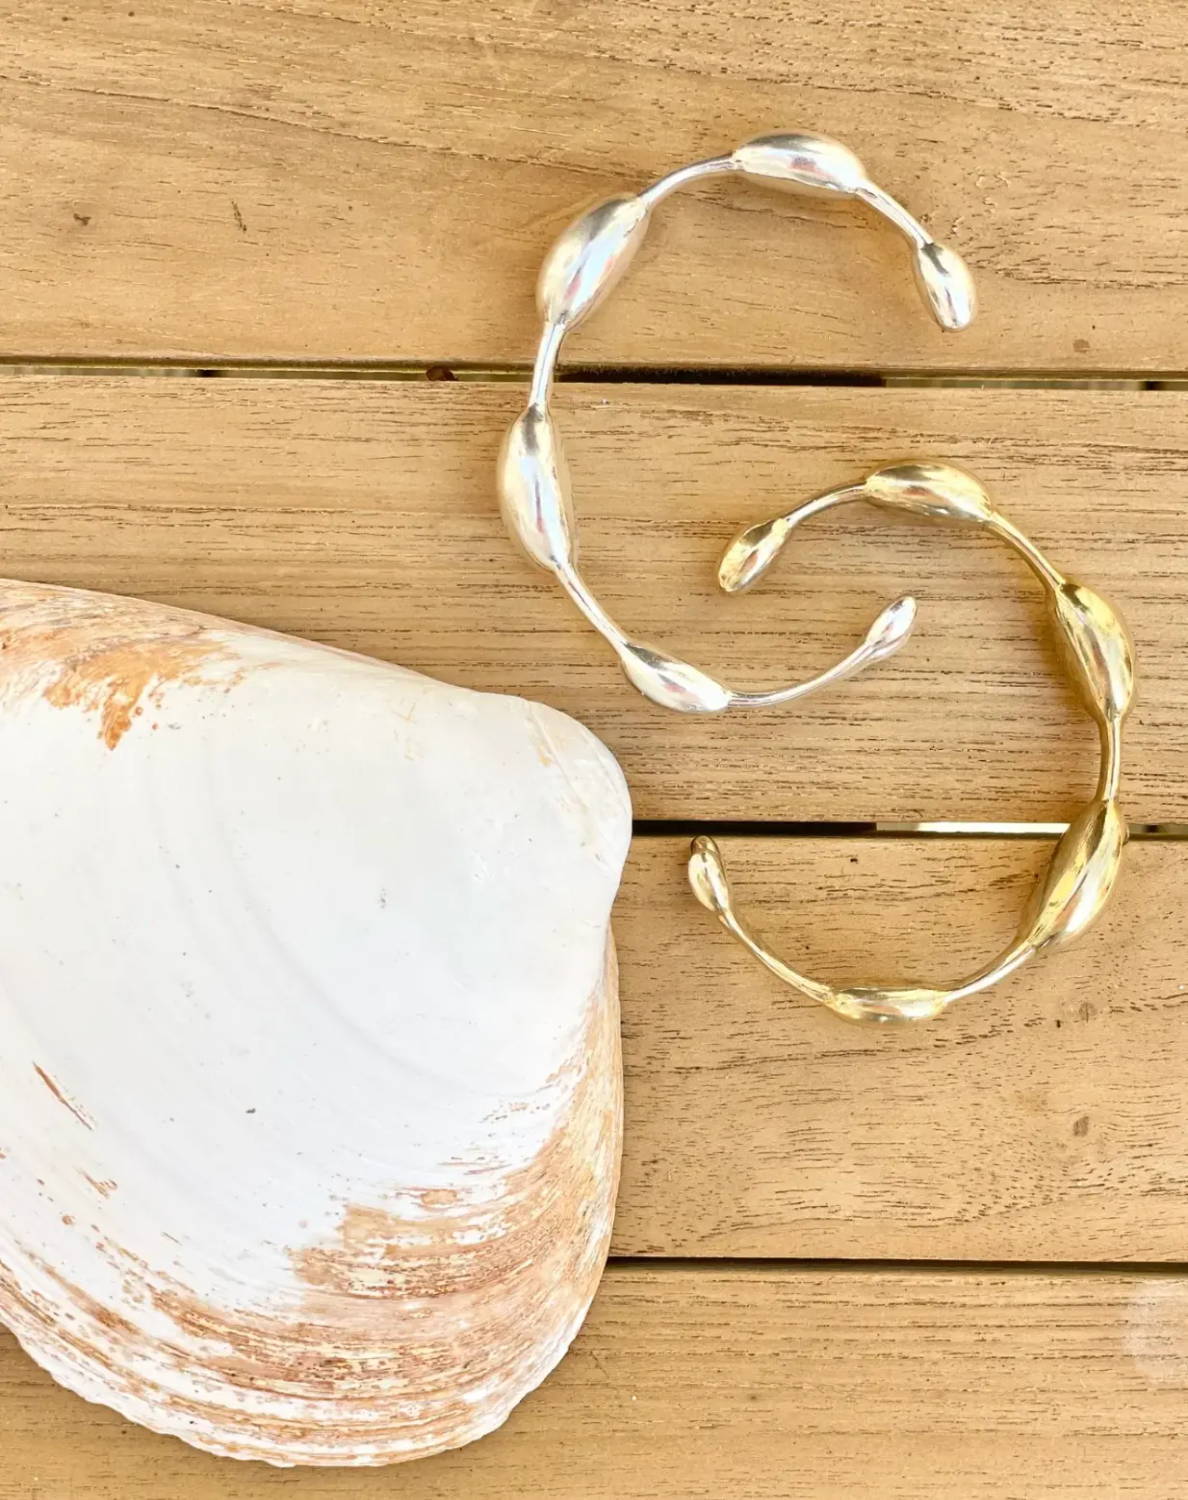 Silver and gold seaweed bracelet with clam shell